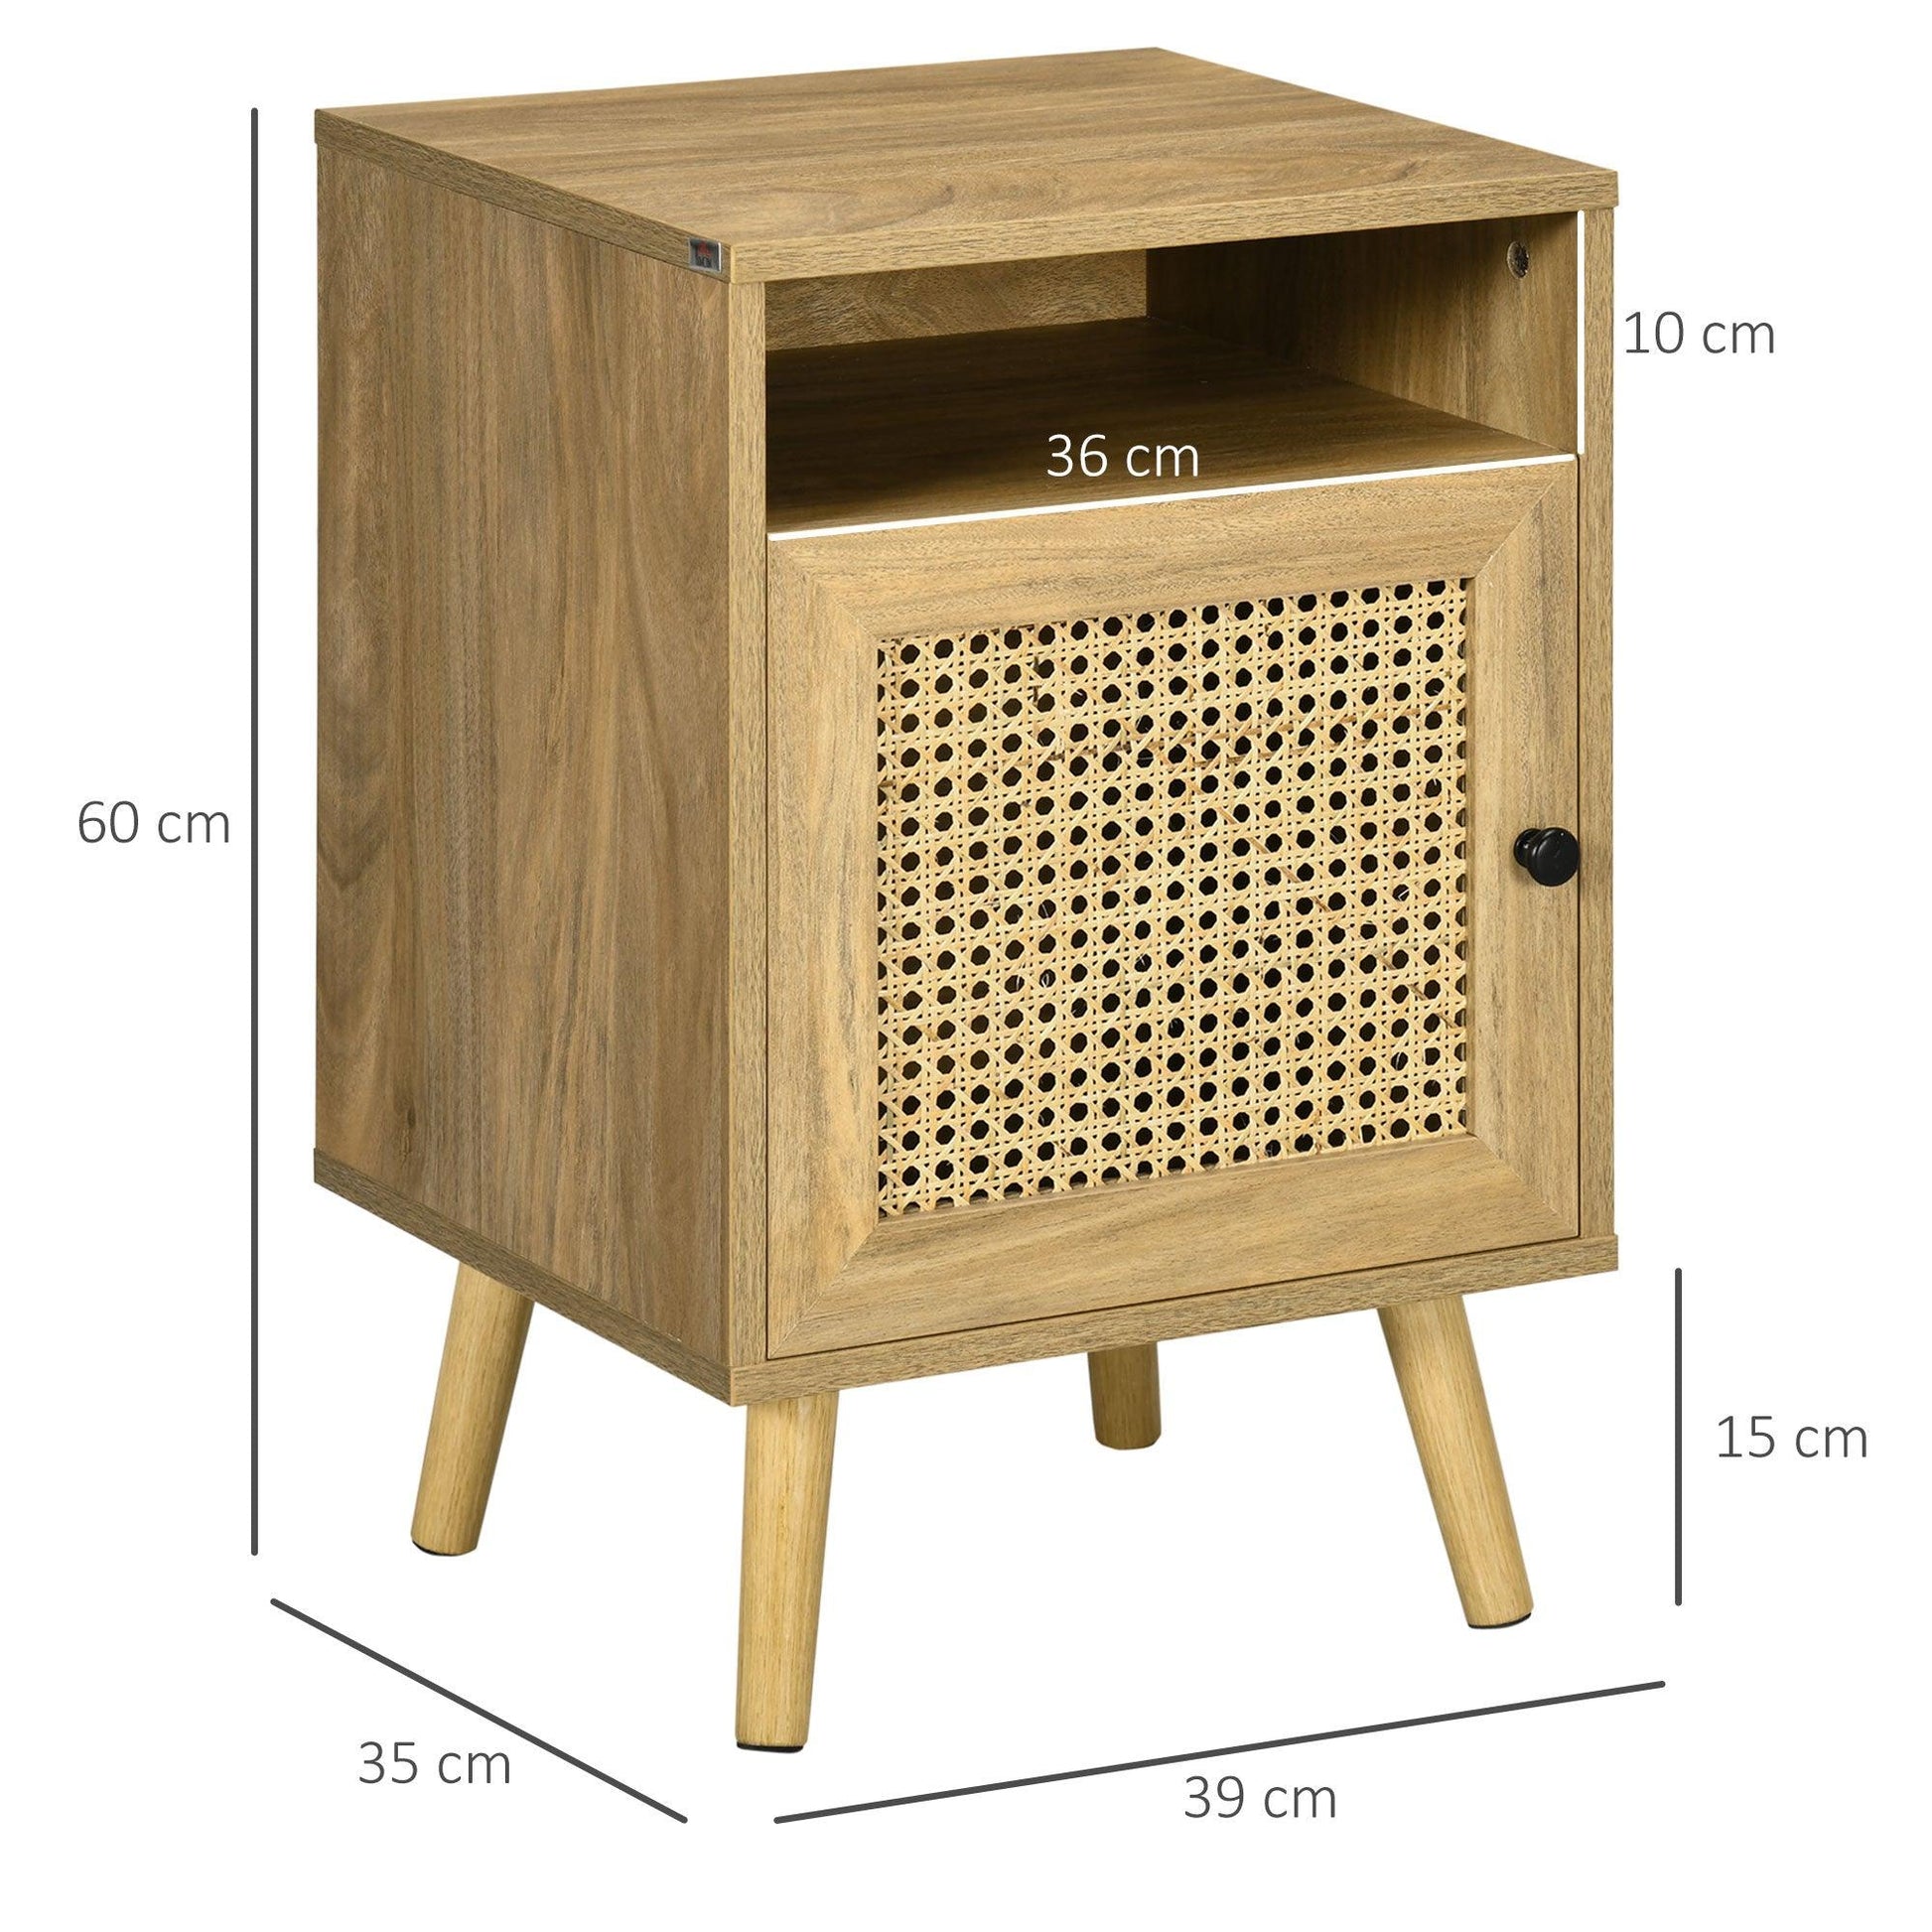 HOMCOM Bedside Table with Rattan Element, Side End Table with Shelf and Cupboard, 39cmx35cmx60cm, Set of 2, Natural - ALL4U RETAILER LTD